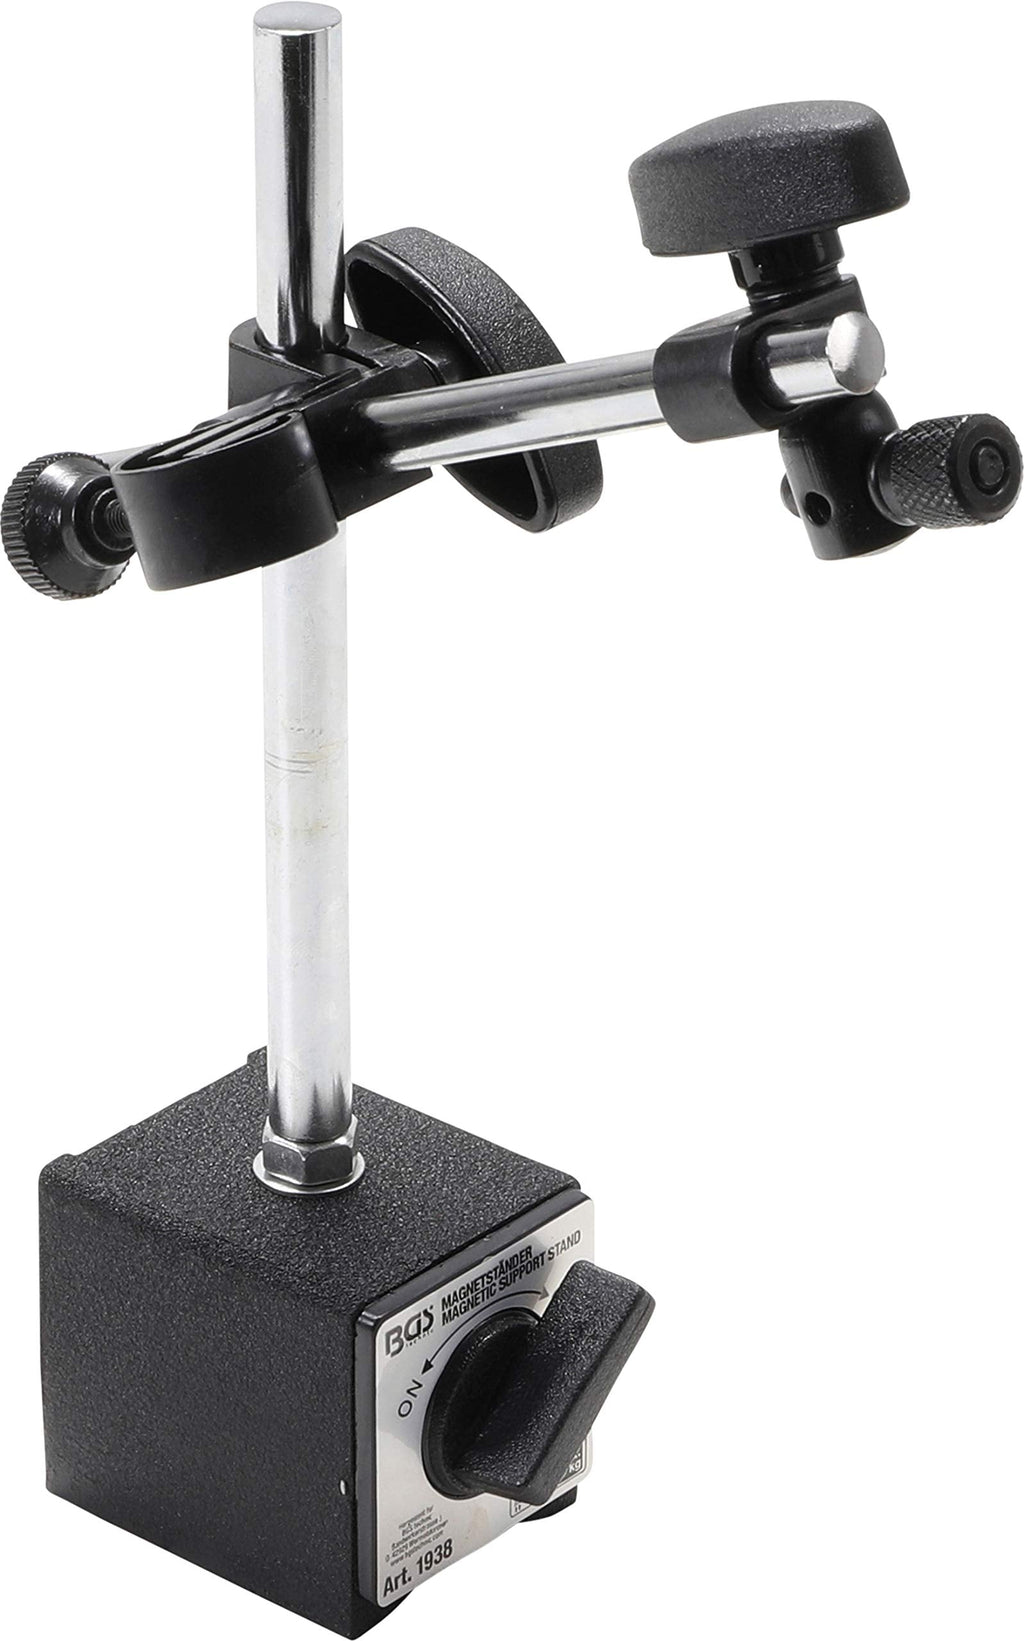  [AUSTRALIA] - BGS 1938 | Magnetic stand for measuring instruments